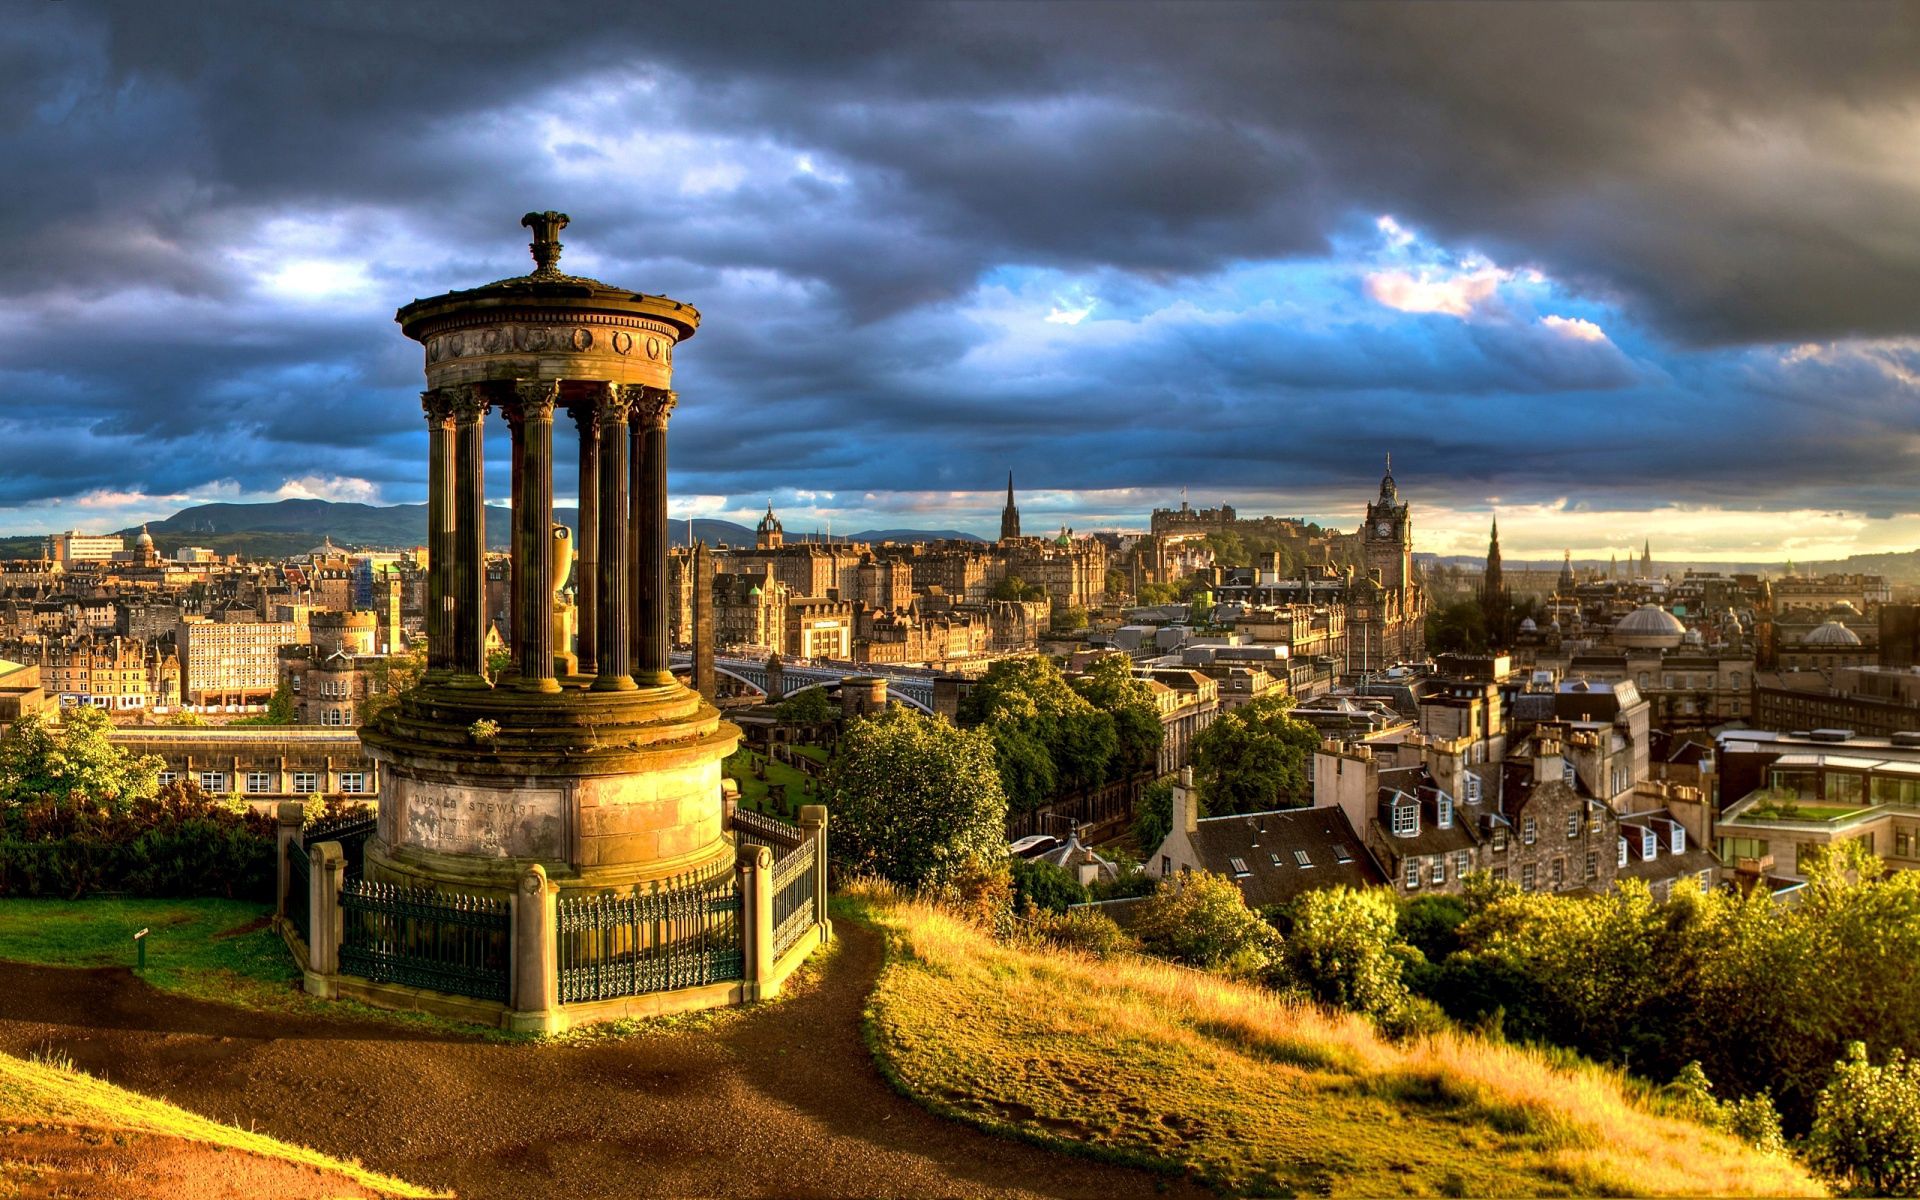 Full HD Wallpaper building, landscape, cities, city, old, stone, ancient